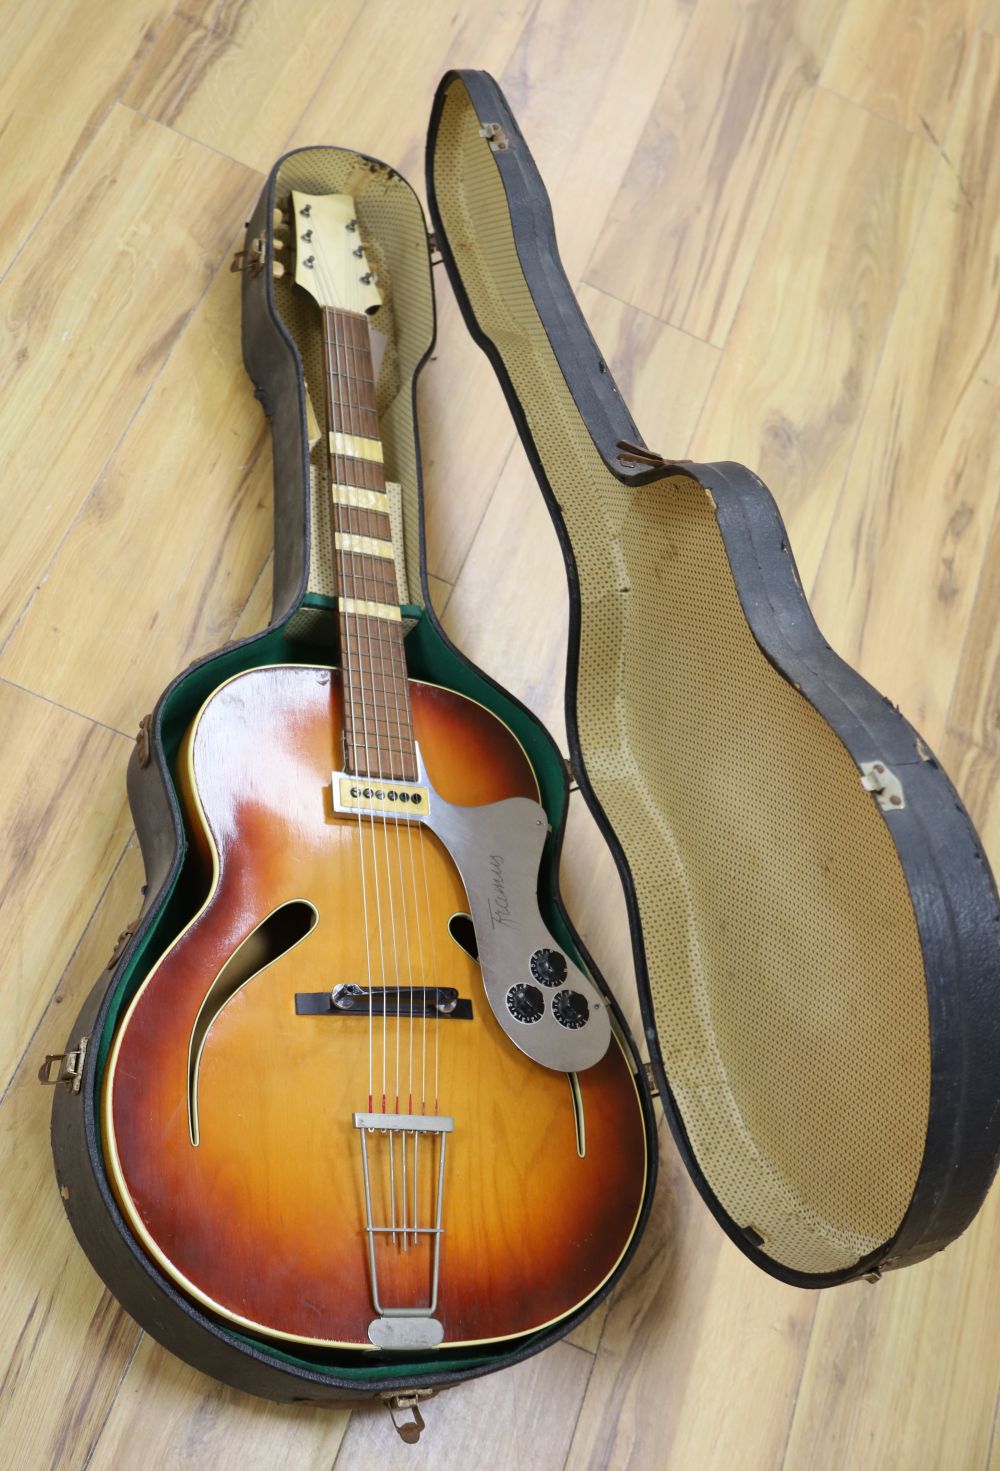 A 1950s possibly Isana semi-acoustic arch top guitar with a hard case. Floating pick-up not an original feature.